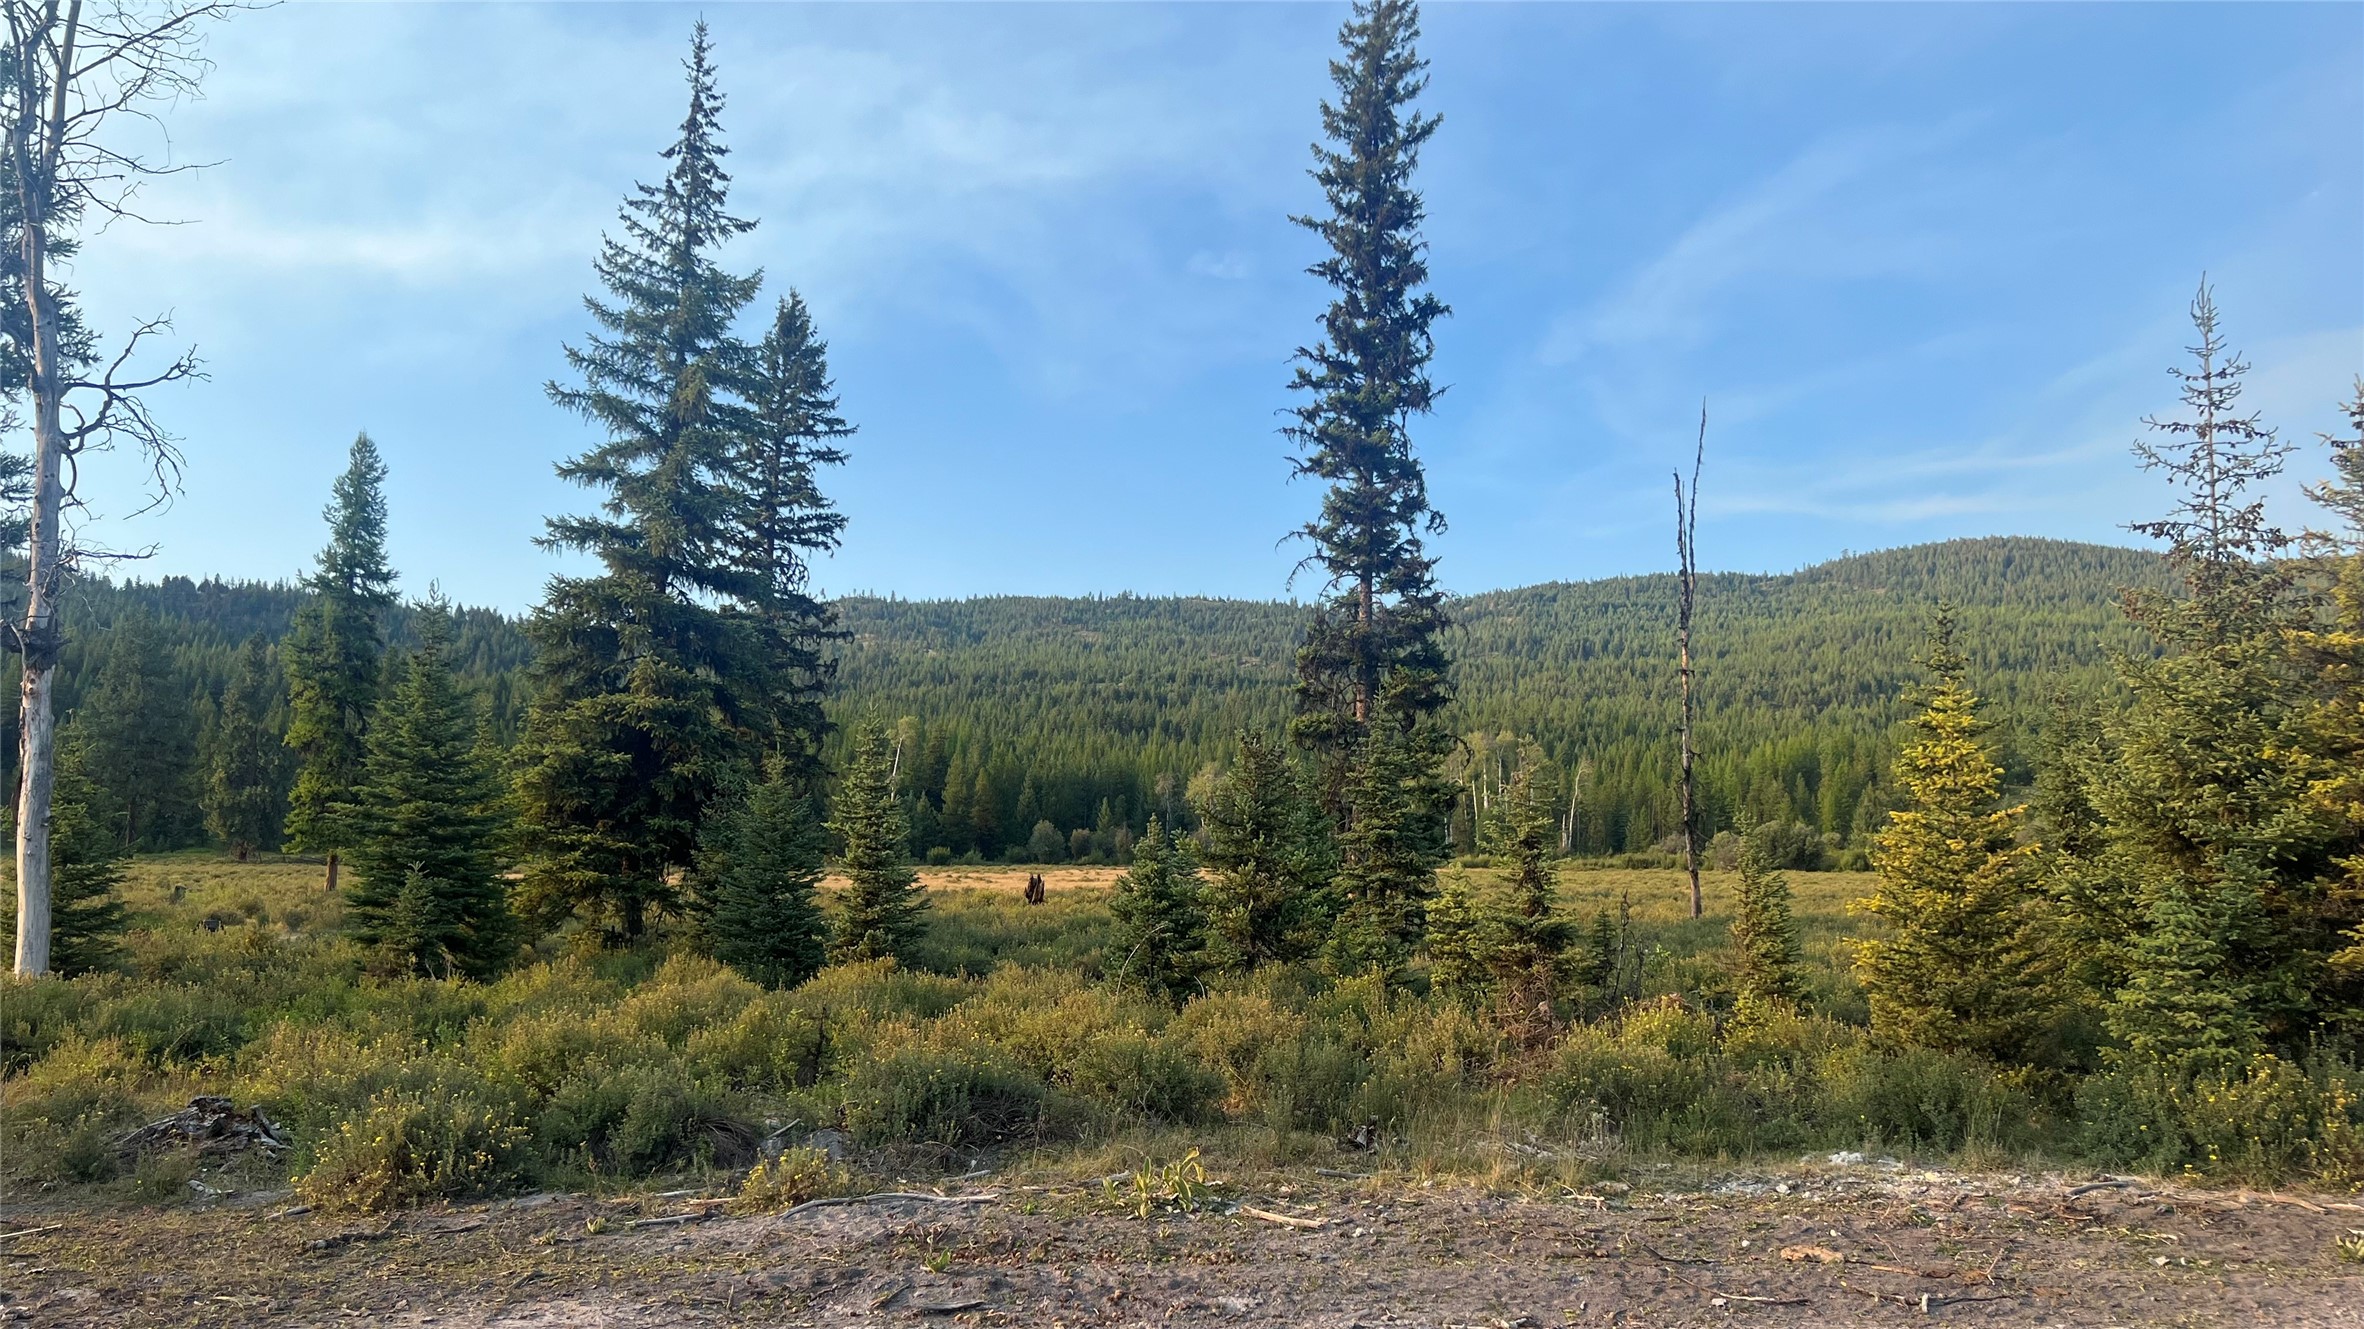 This 20.16 acre lot is located within close proximity to Happy's Inn and halfway between Libby and Kalispell MT. Whether your building your dream home or starting a small homestead this property will meet your needs and has endless potential. Within a short proximity are the Thompson Chain of lakes, lakes, streams and rivers. The year long recreational opportunities in the area are countless. Phone and power are installed. Take a drive and visit your future homesite. Call Roby Bowe at 406-293-1988 or your Real Estate Professional.